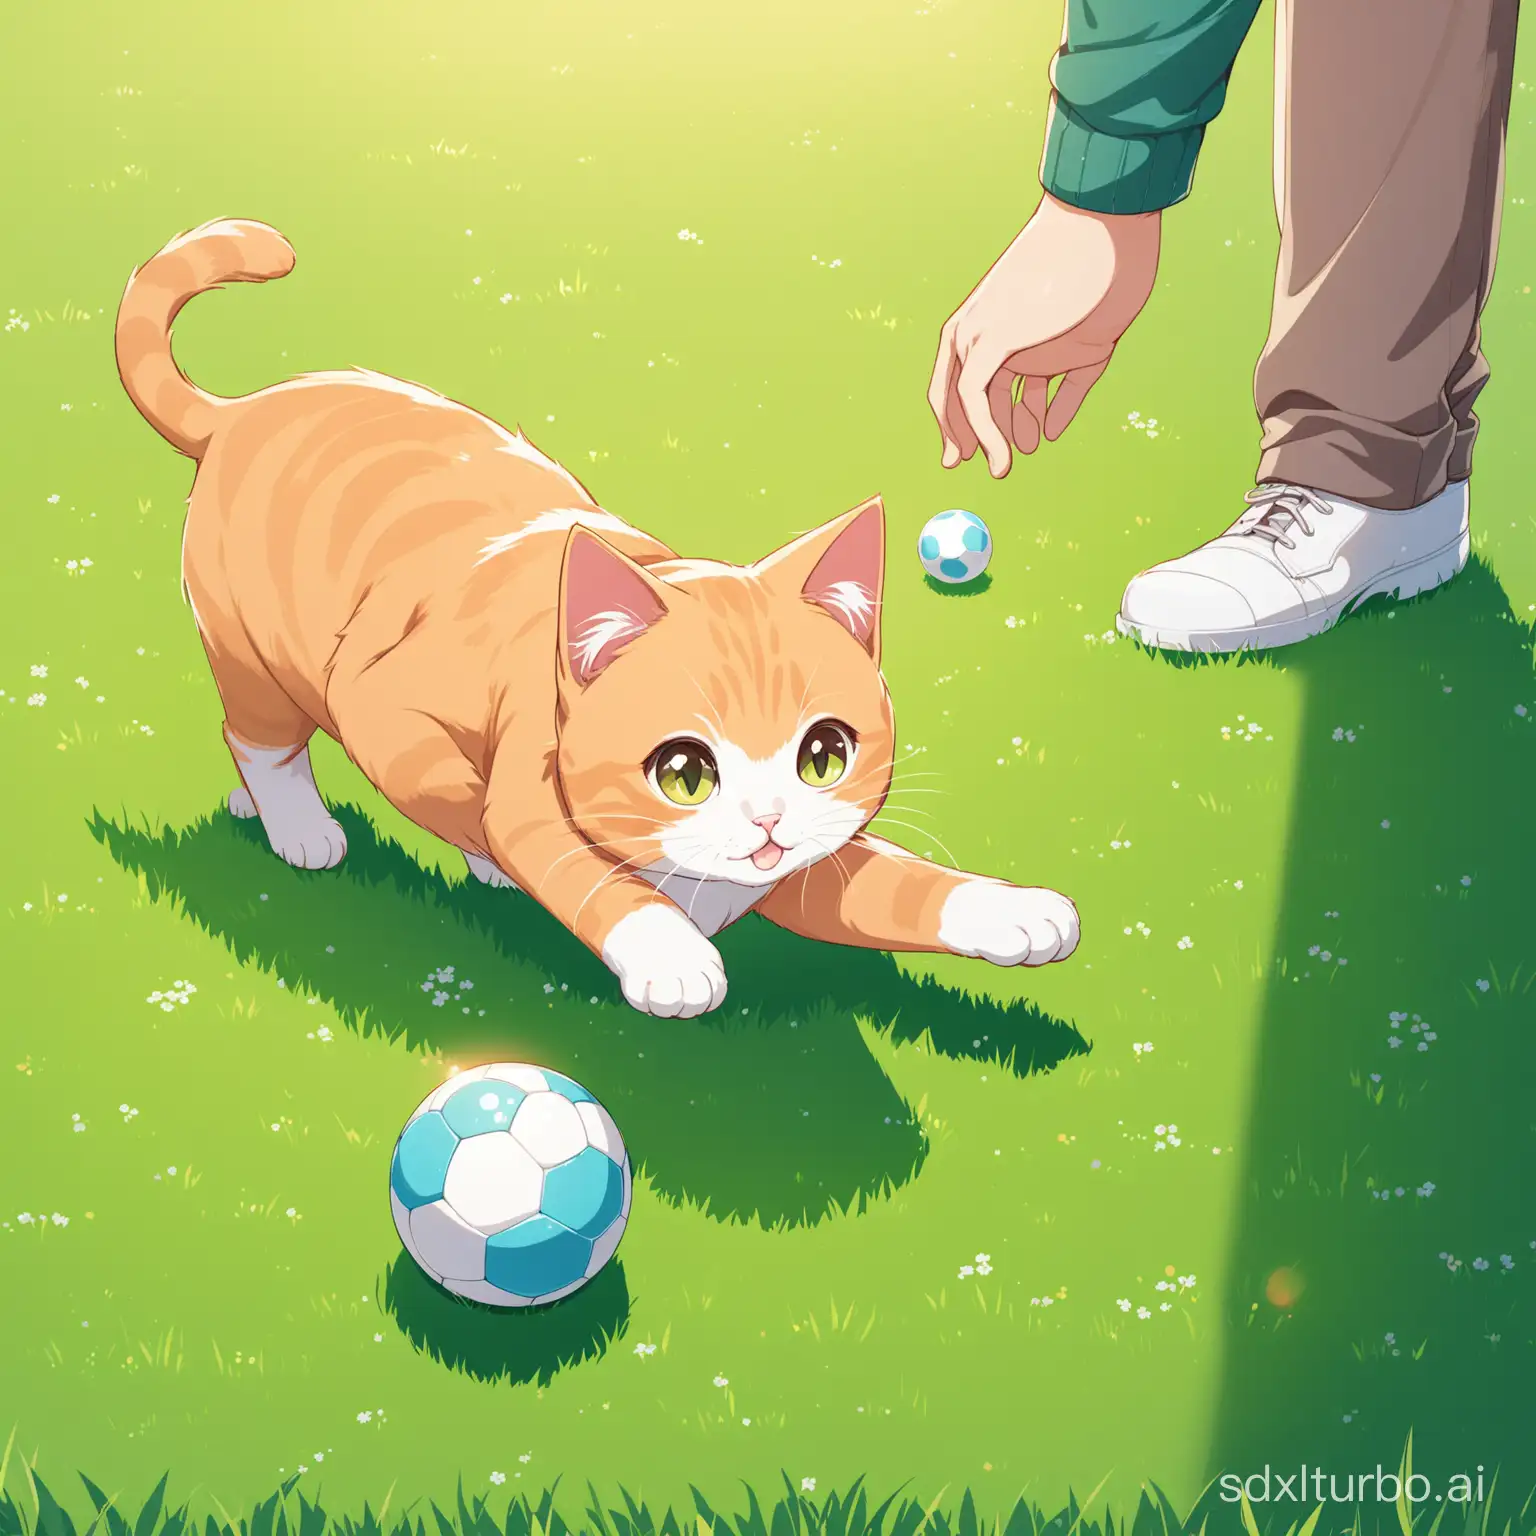 The cat is playing with a ball on the grass, while the owner watches nearby